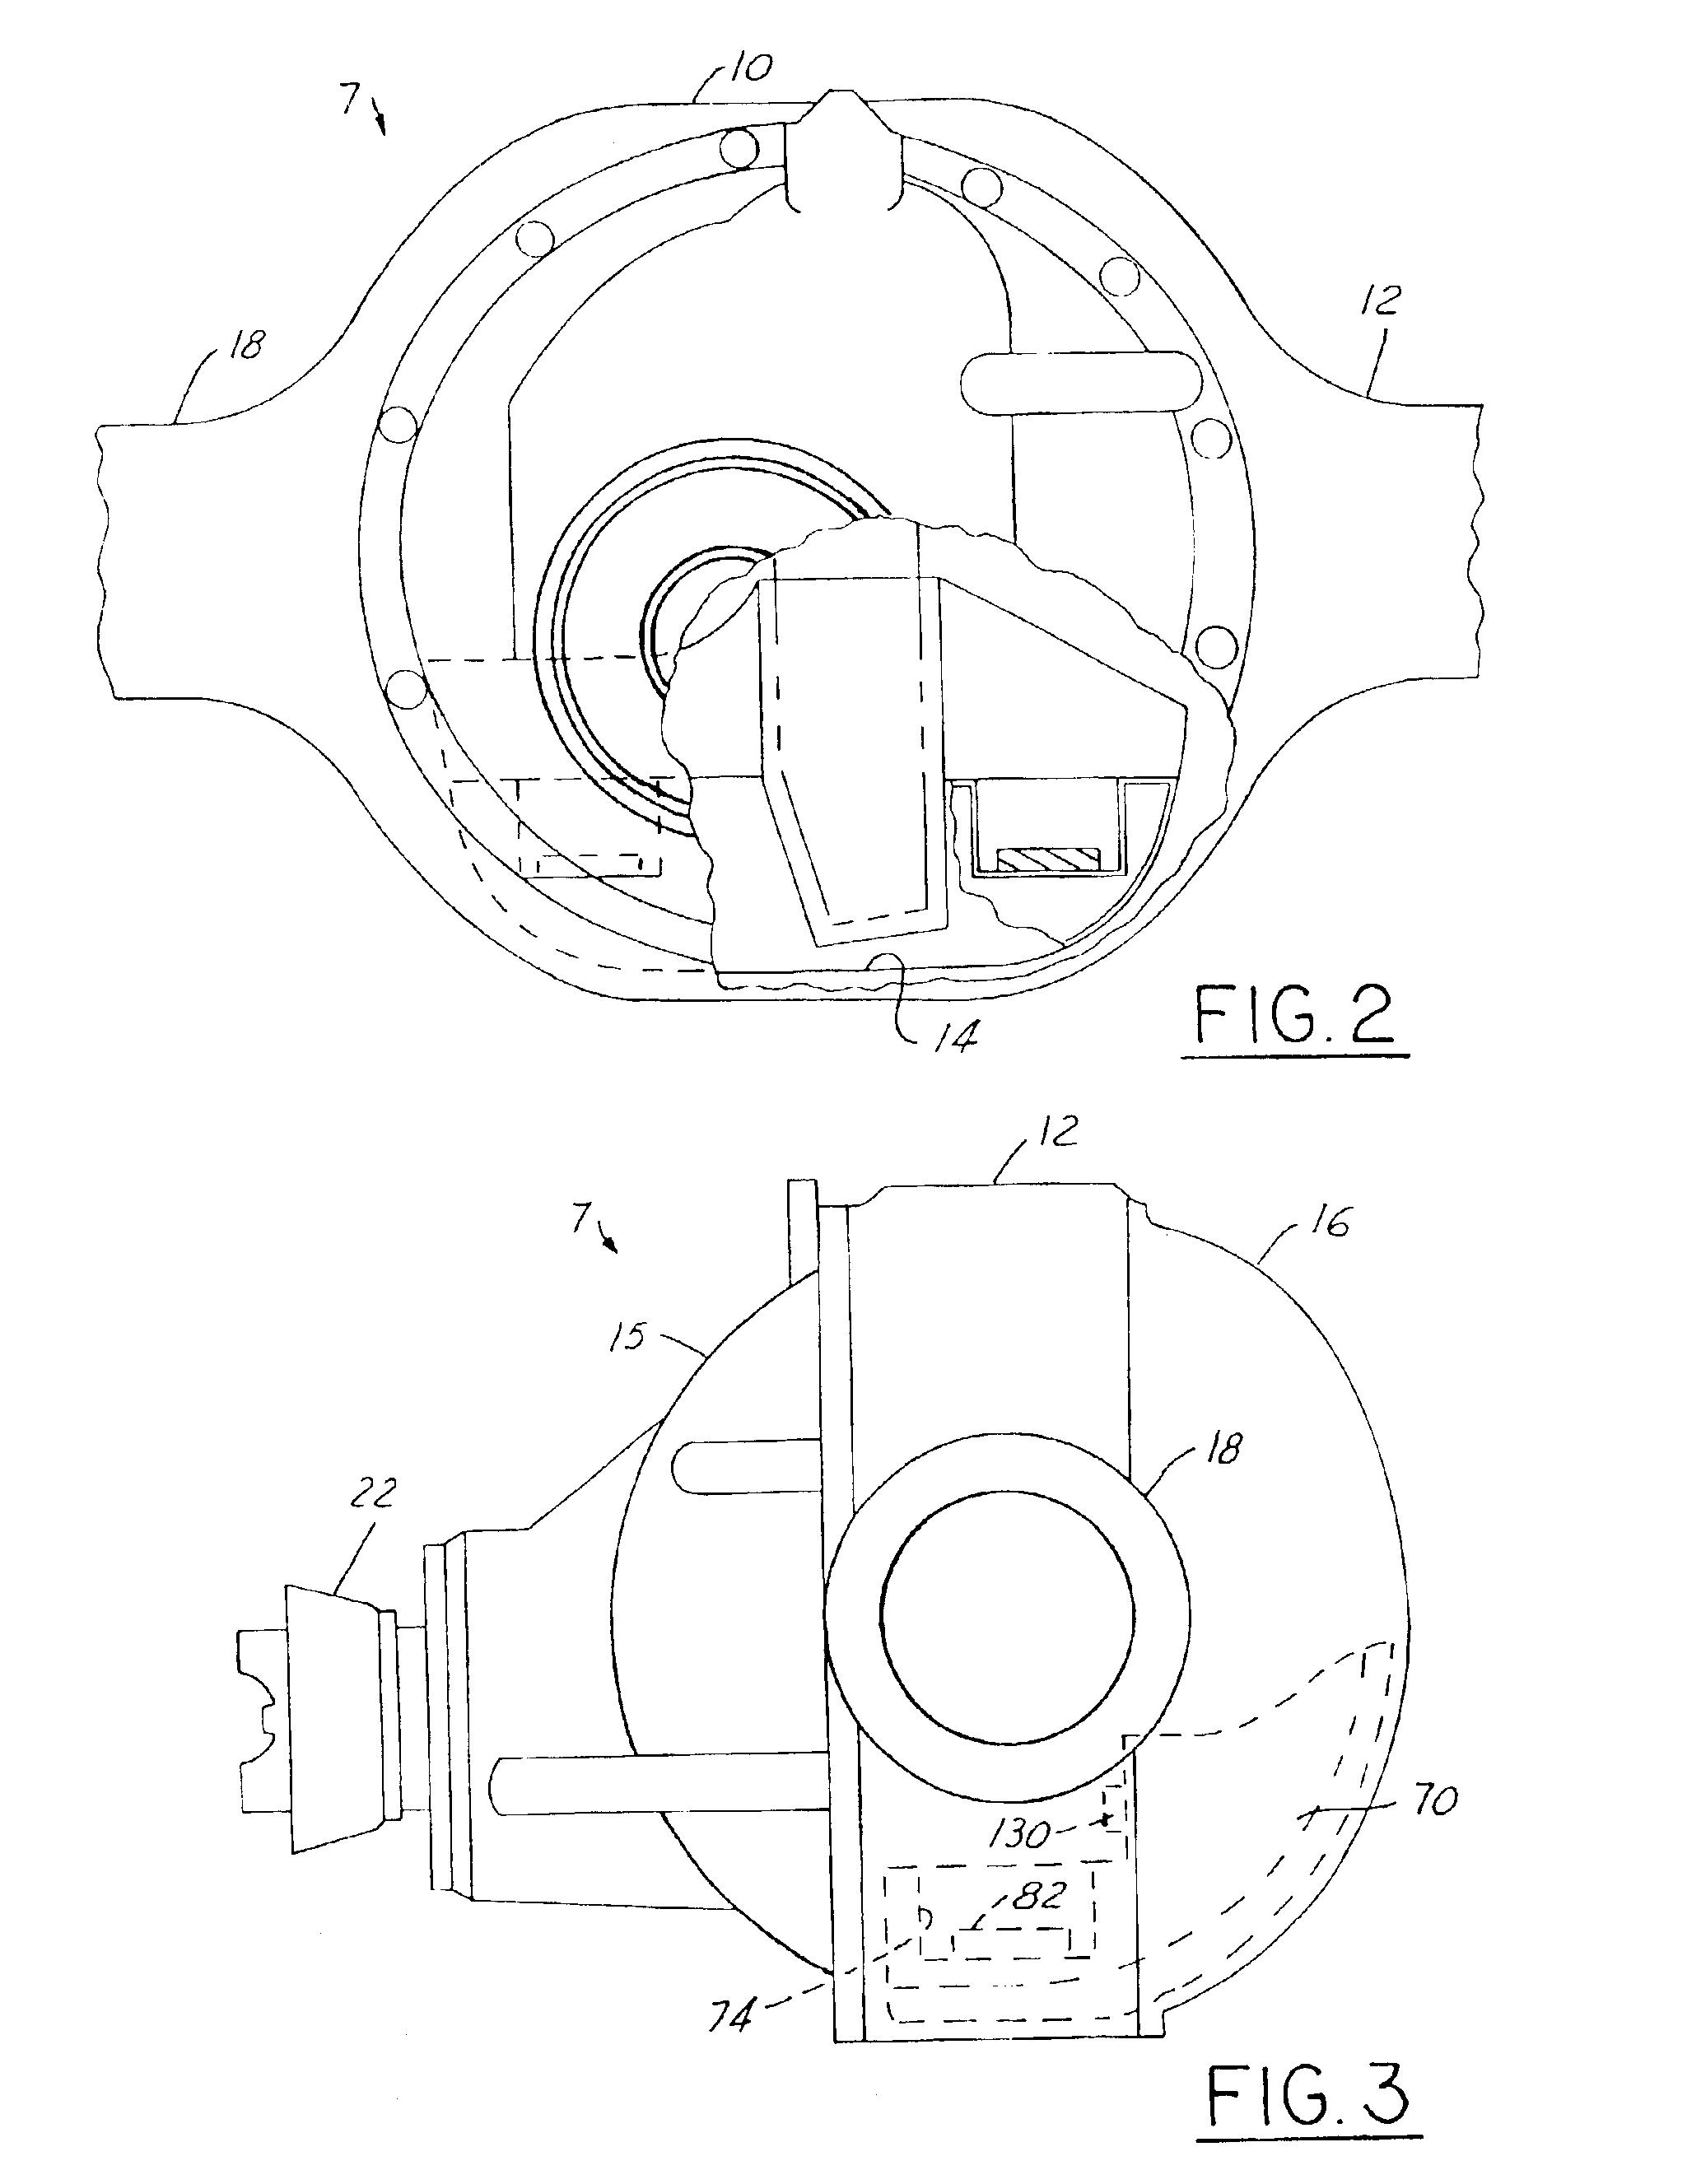 Drive axle assembly with insert